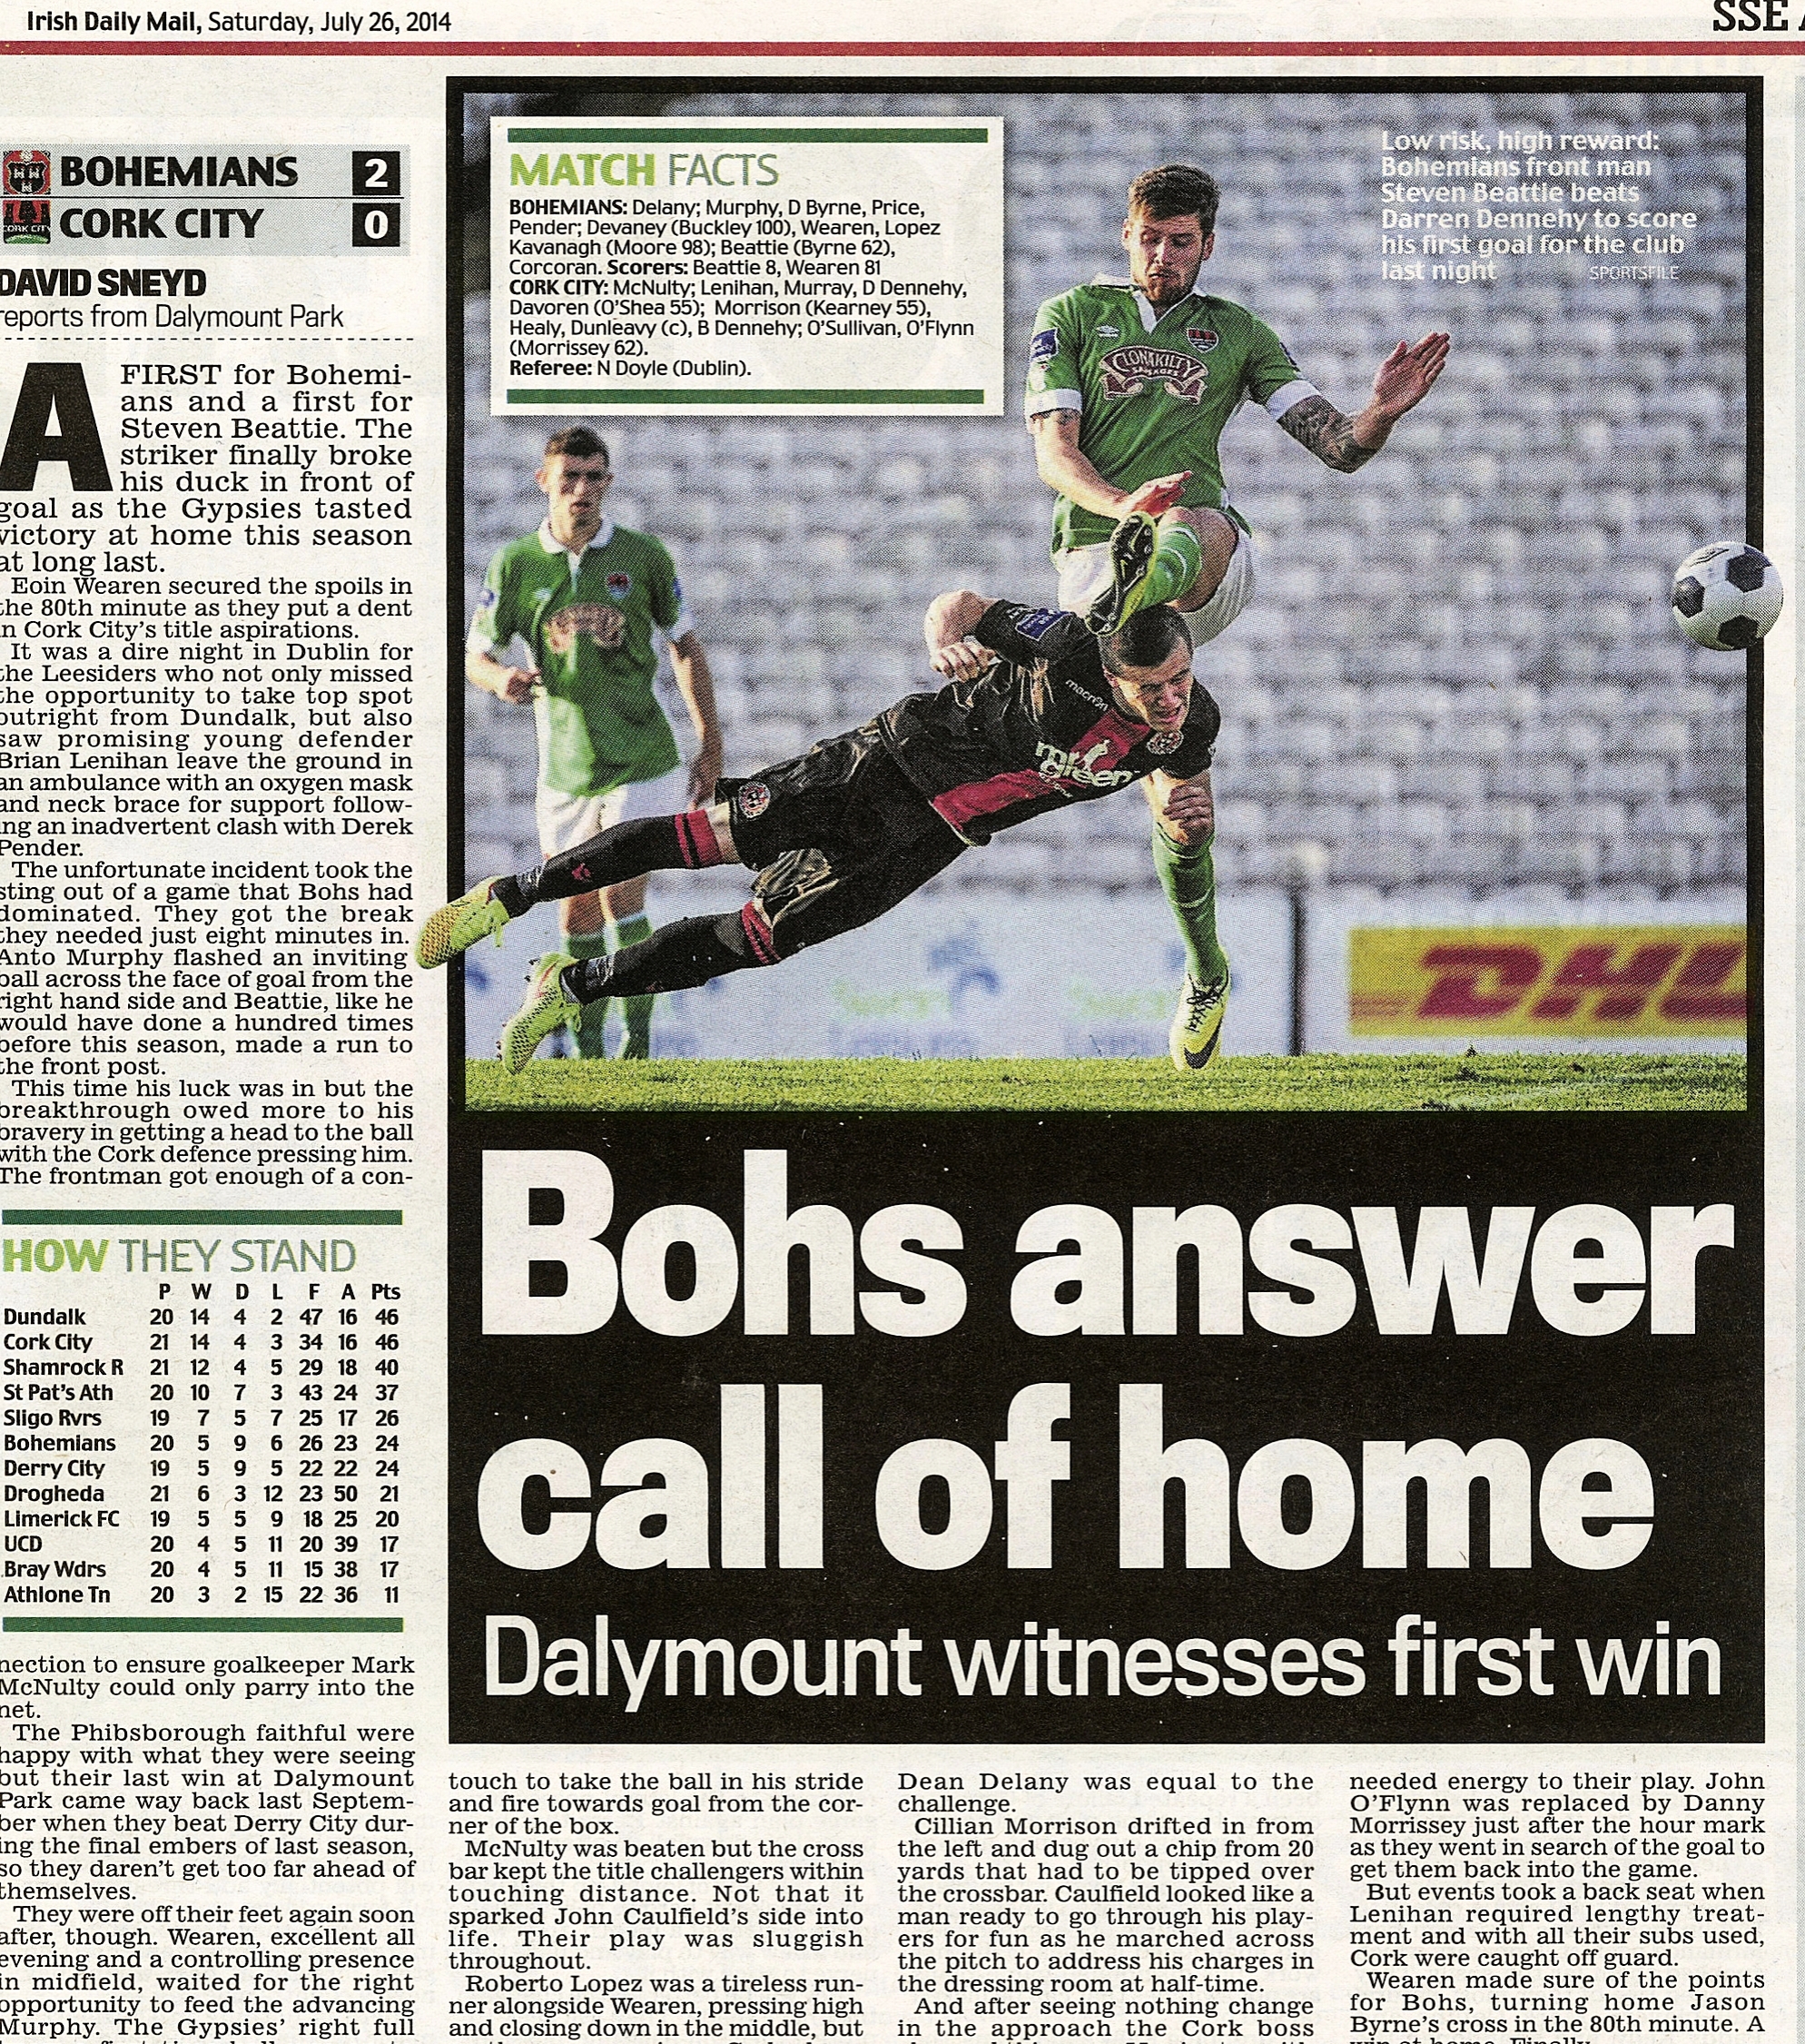  Steven Beattie of Bohemians heads in his side's first goal despite the tackle of Darren Dennehy of Cork City at Dalymount Park July 26 2014  Irish Daily Mail   